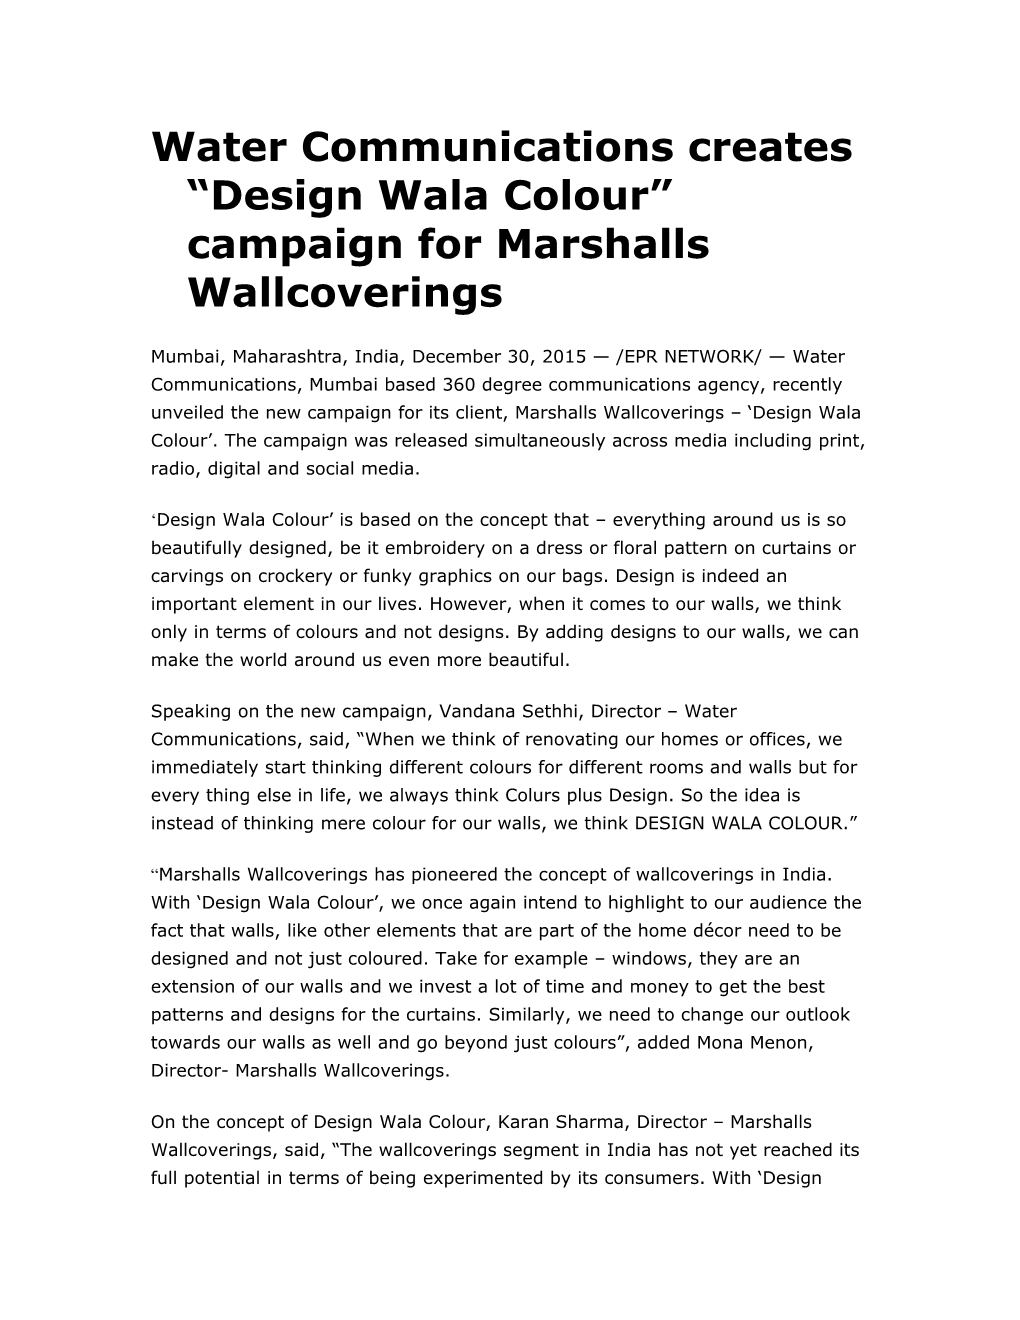 Water Communications Creates Design Wala Colour Campaign for Marshalls Wallcoverings